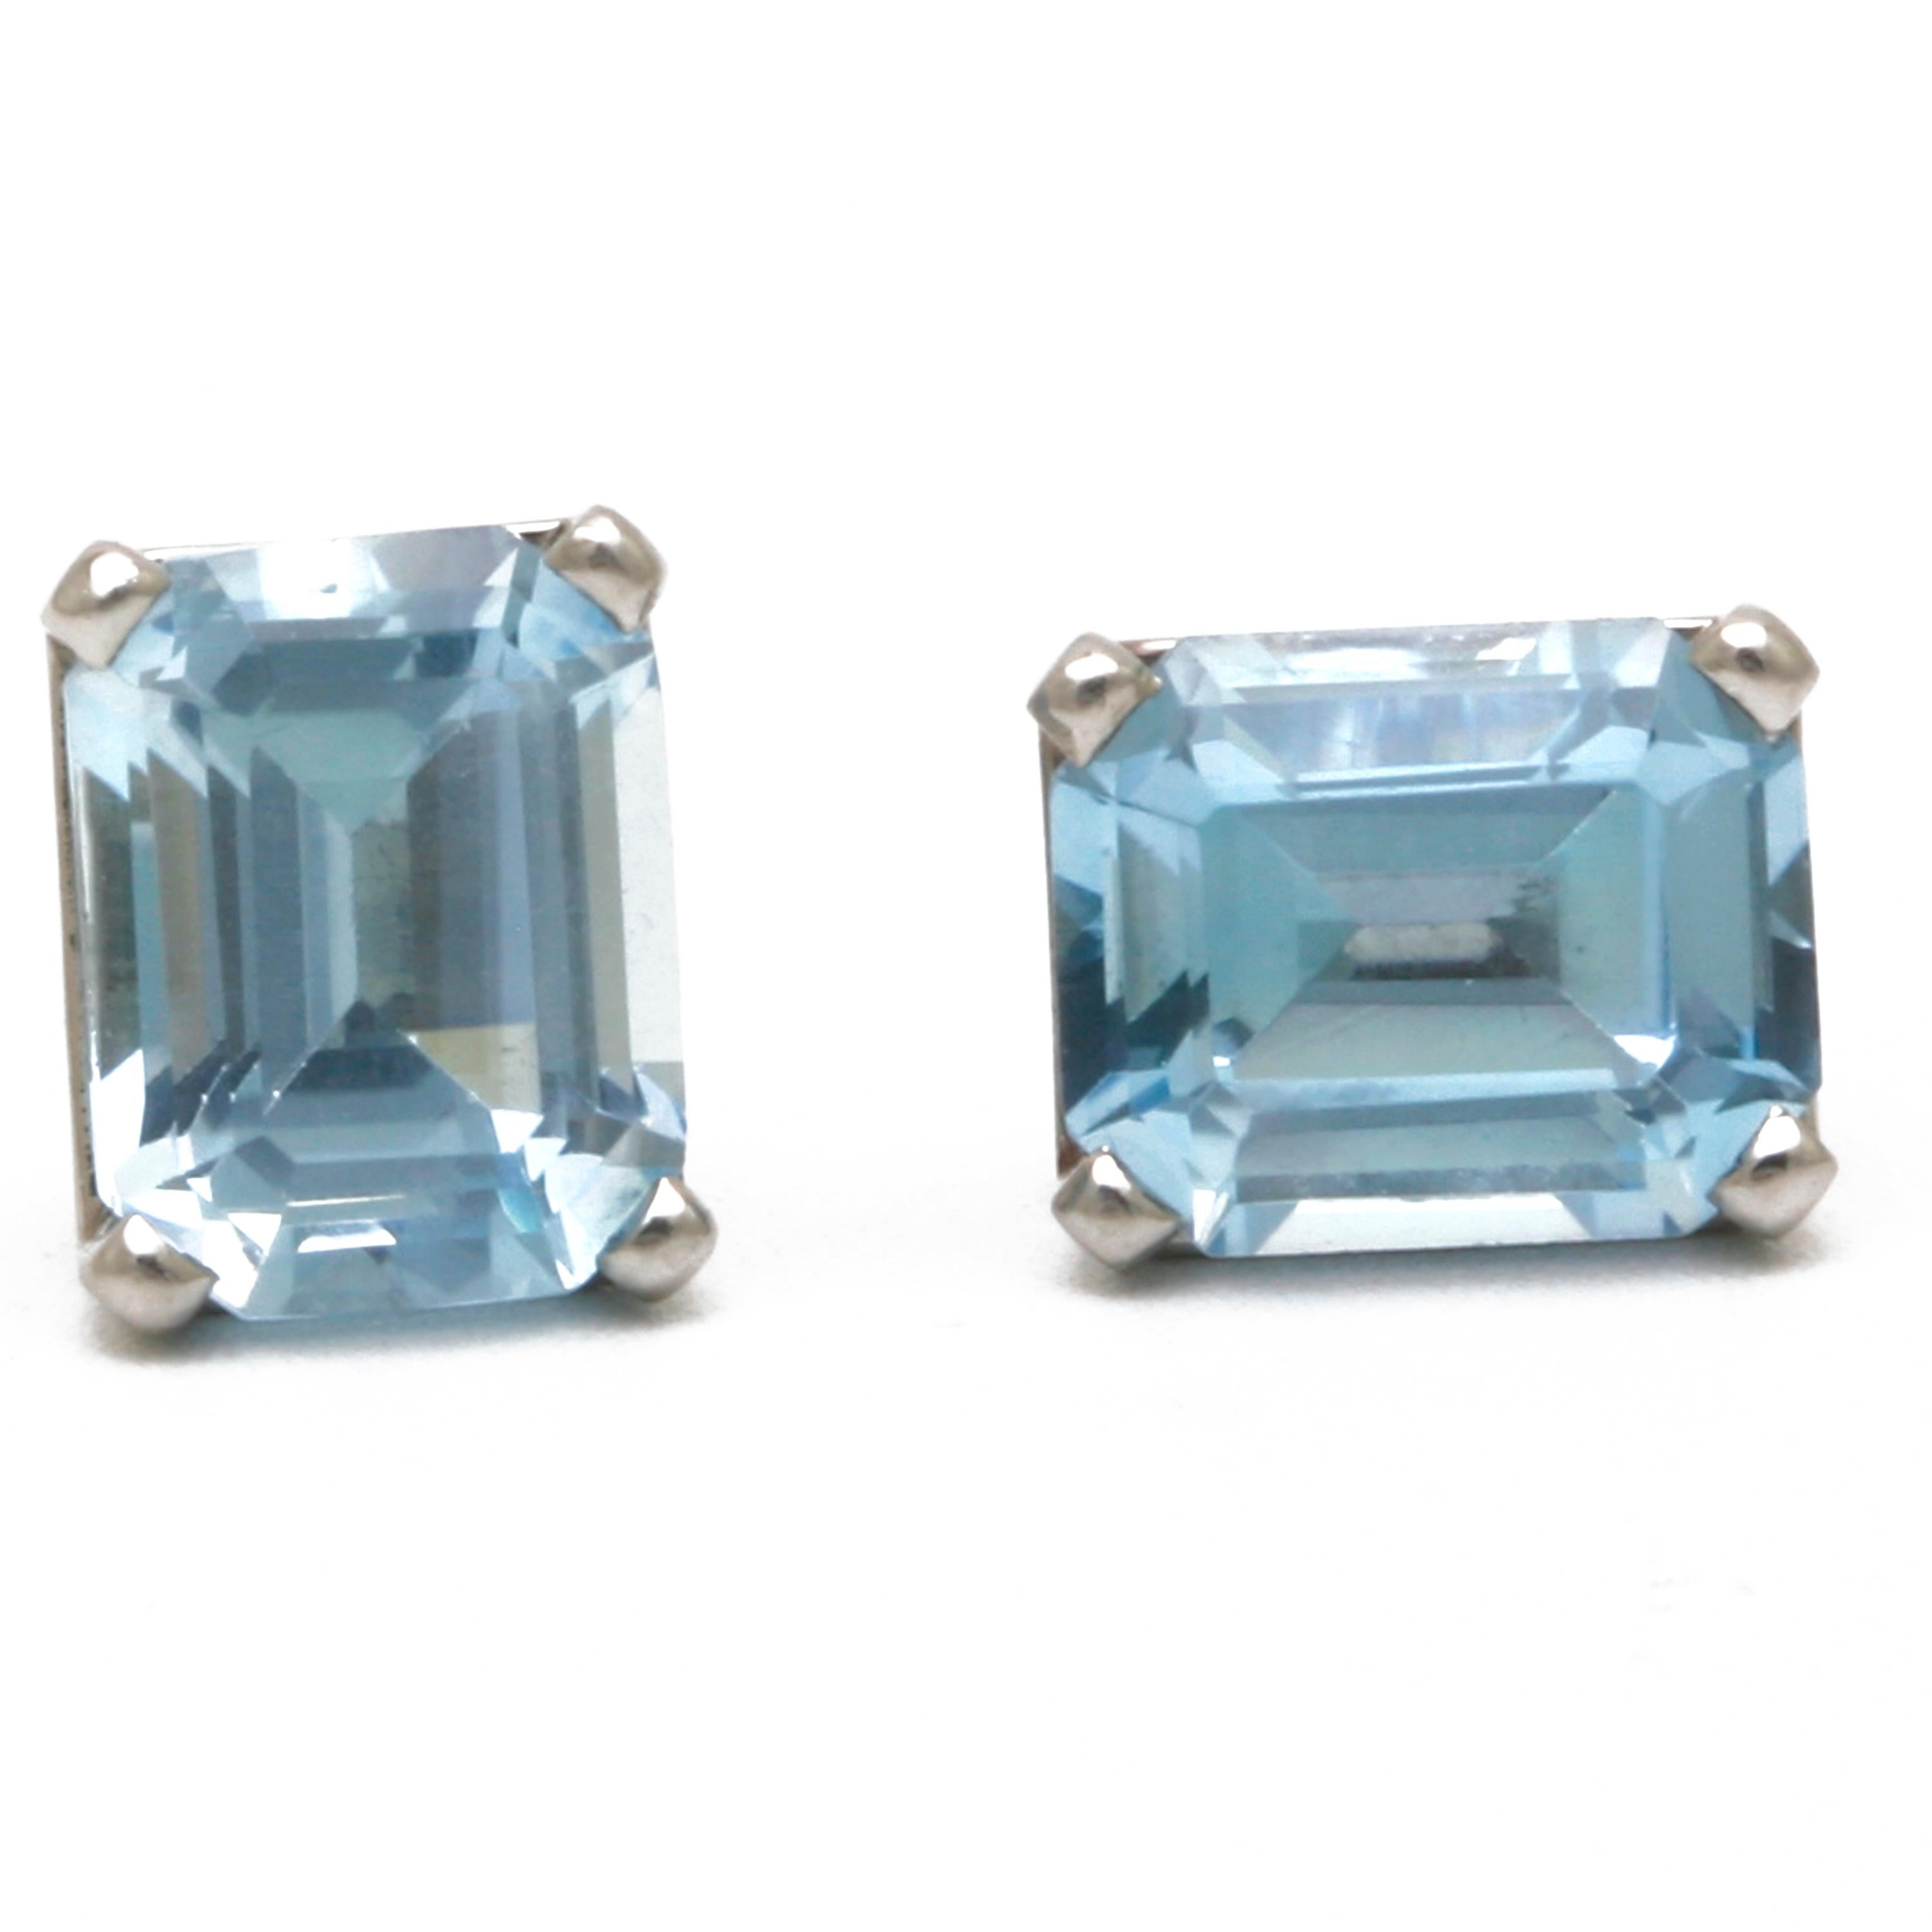 These Aquamarine earrings have a deep blue that establishes color saturation. The result is a beautifully matched pair of emerald cut Aquamarine earrings. May be converted to clip-on backs.